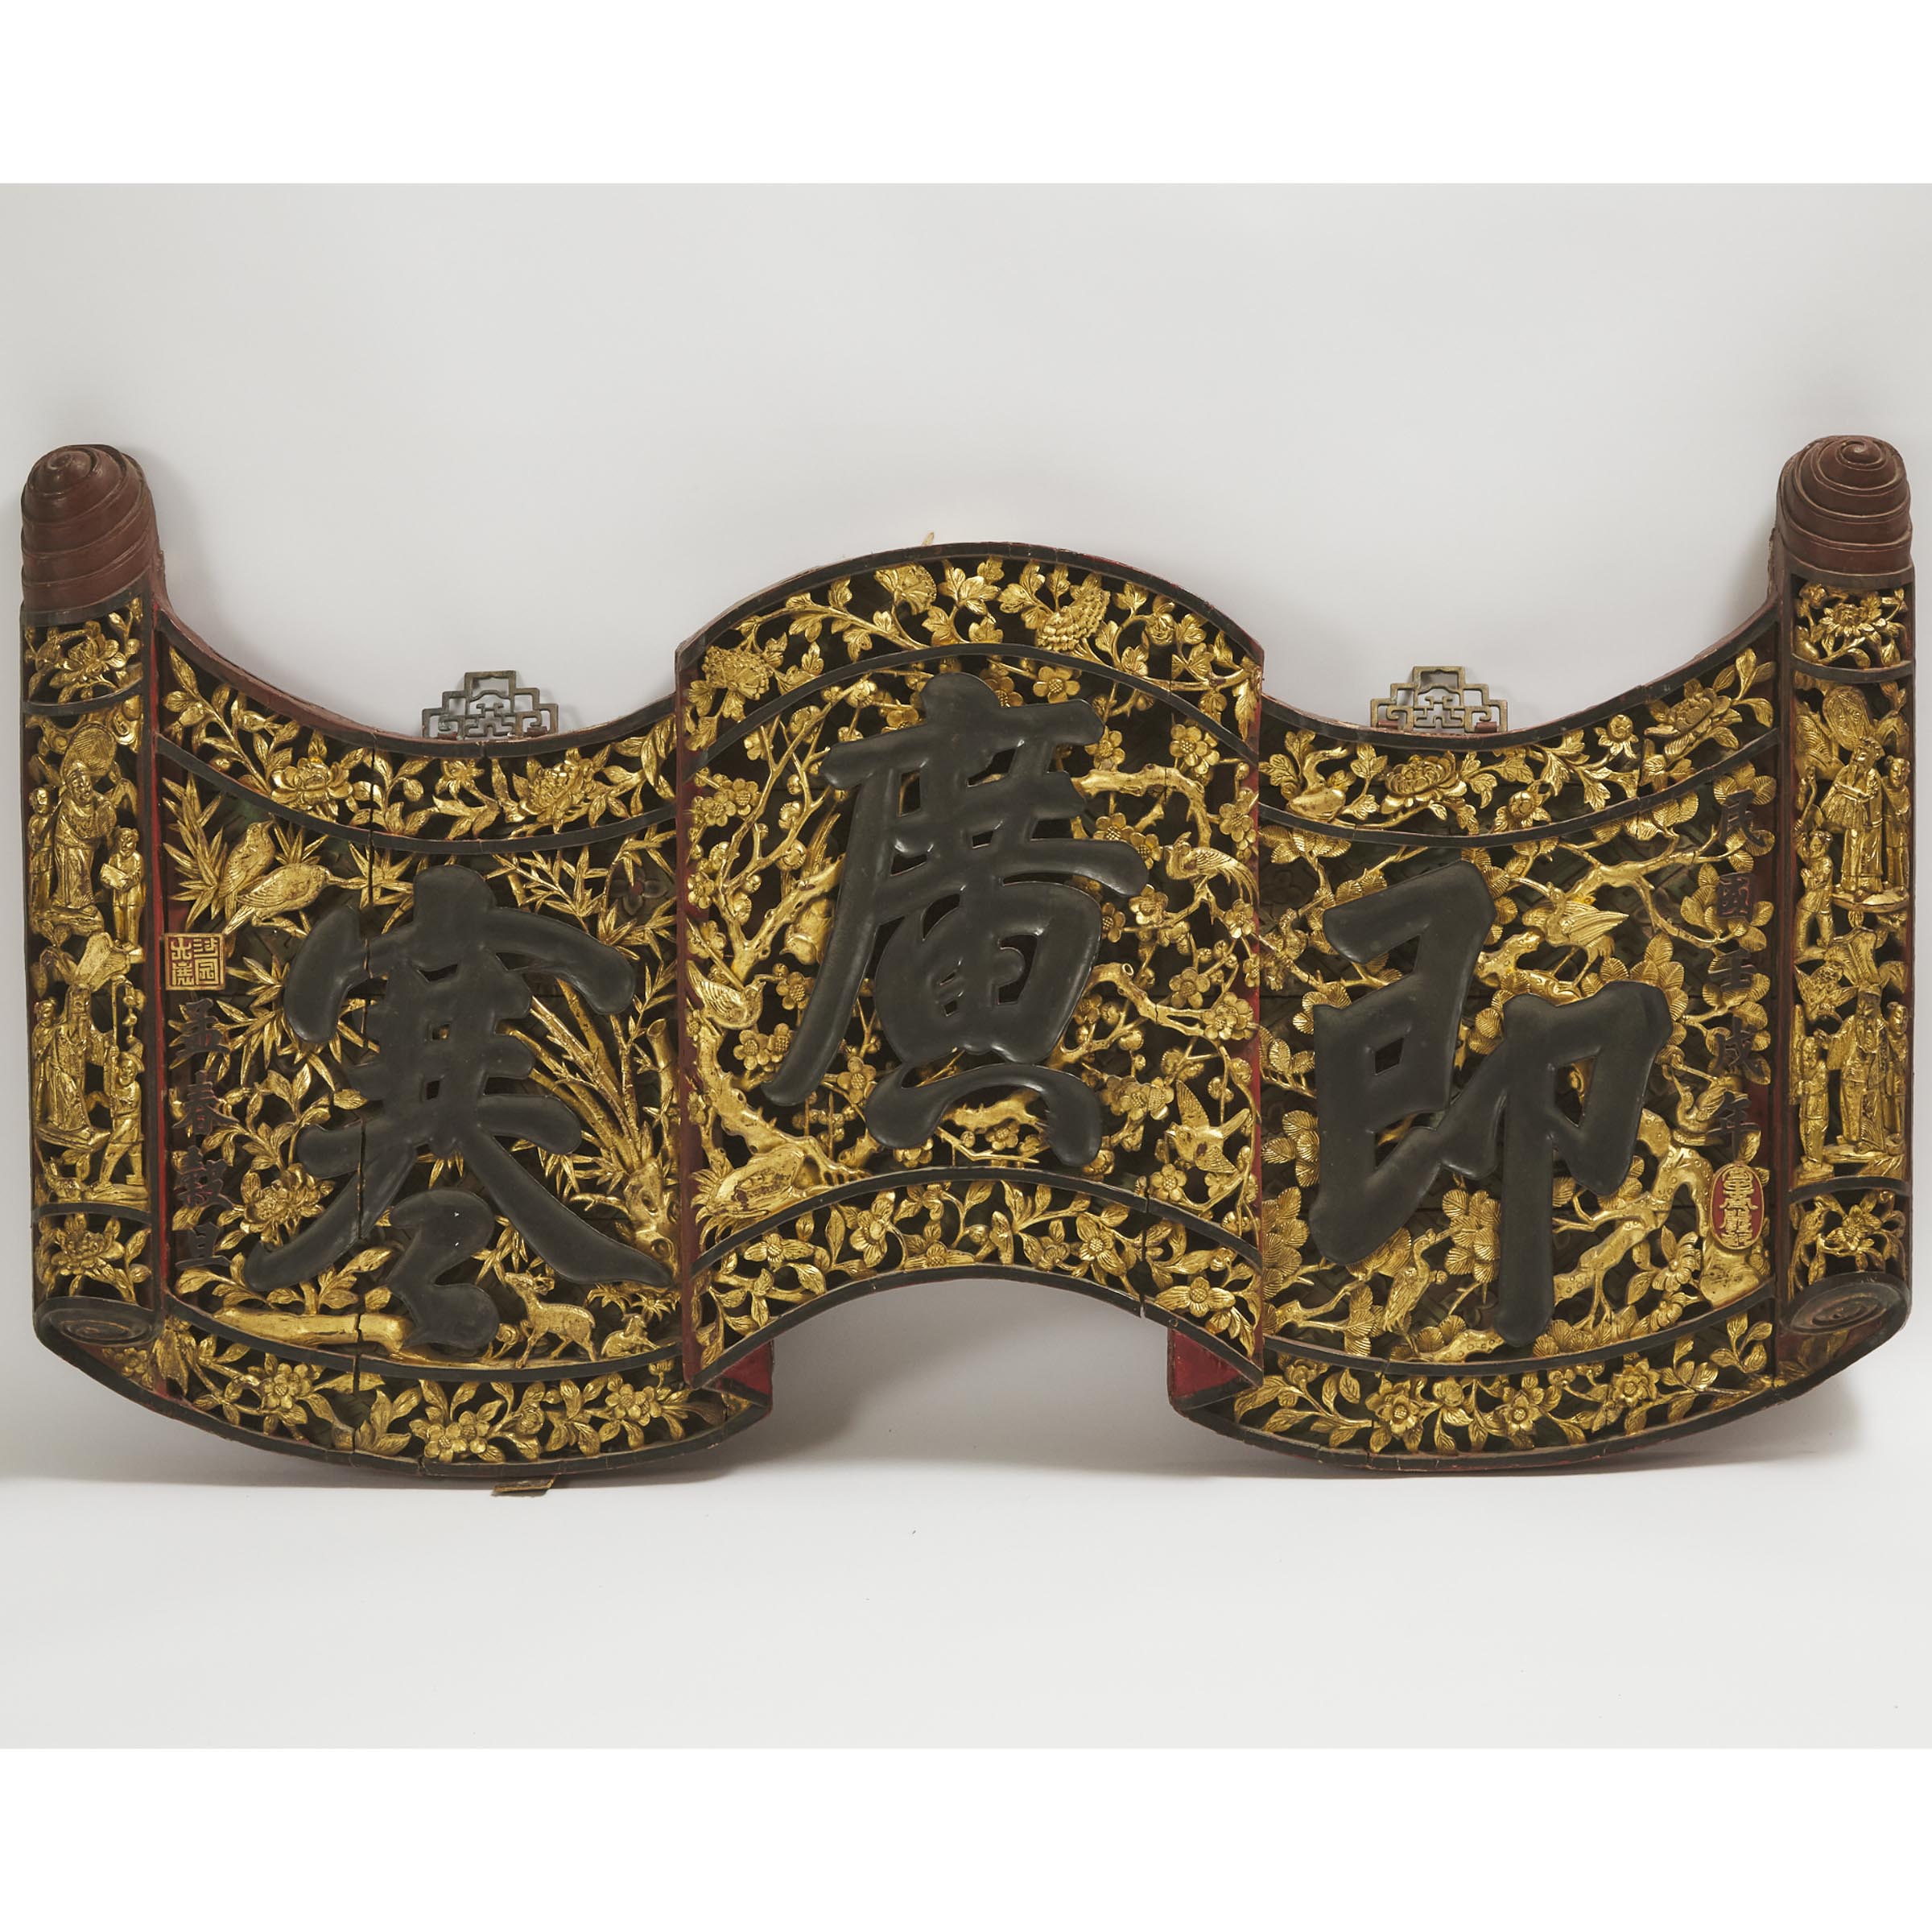 A Large Reticulated Gilt Wood Scroll-Form